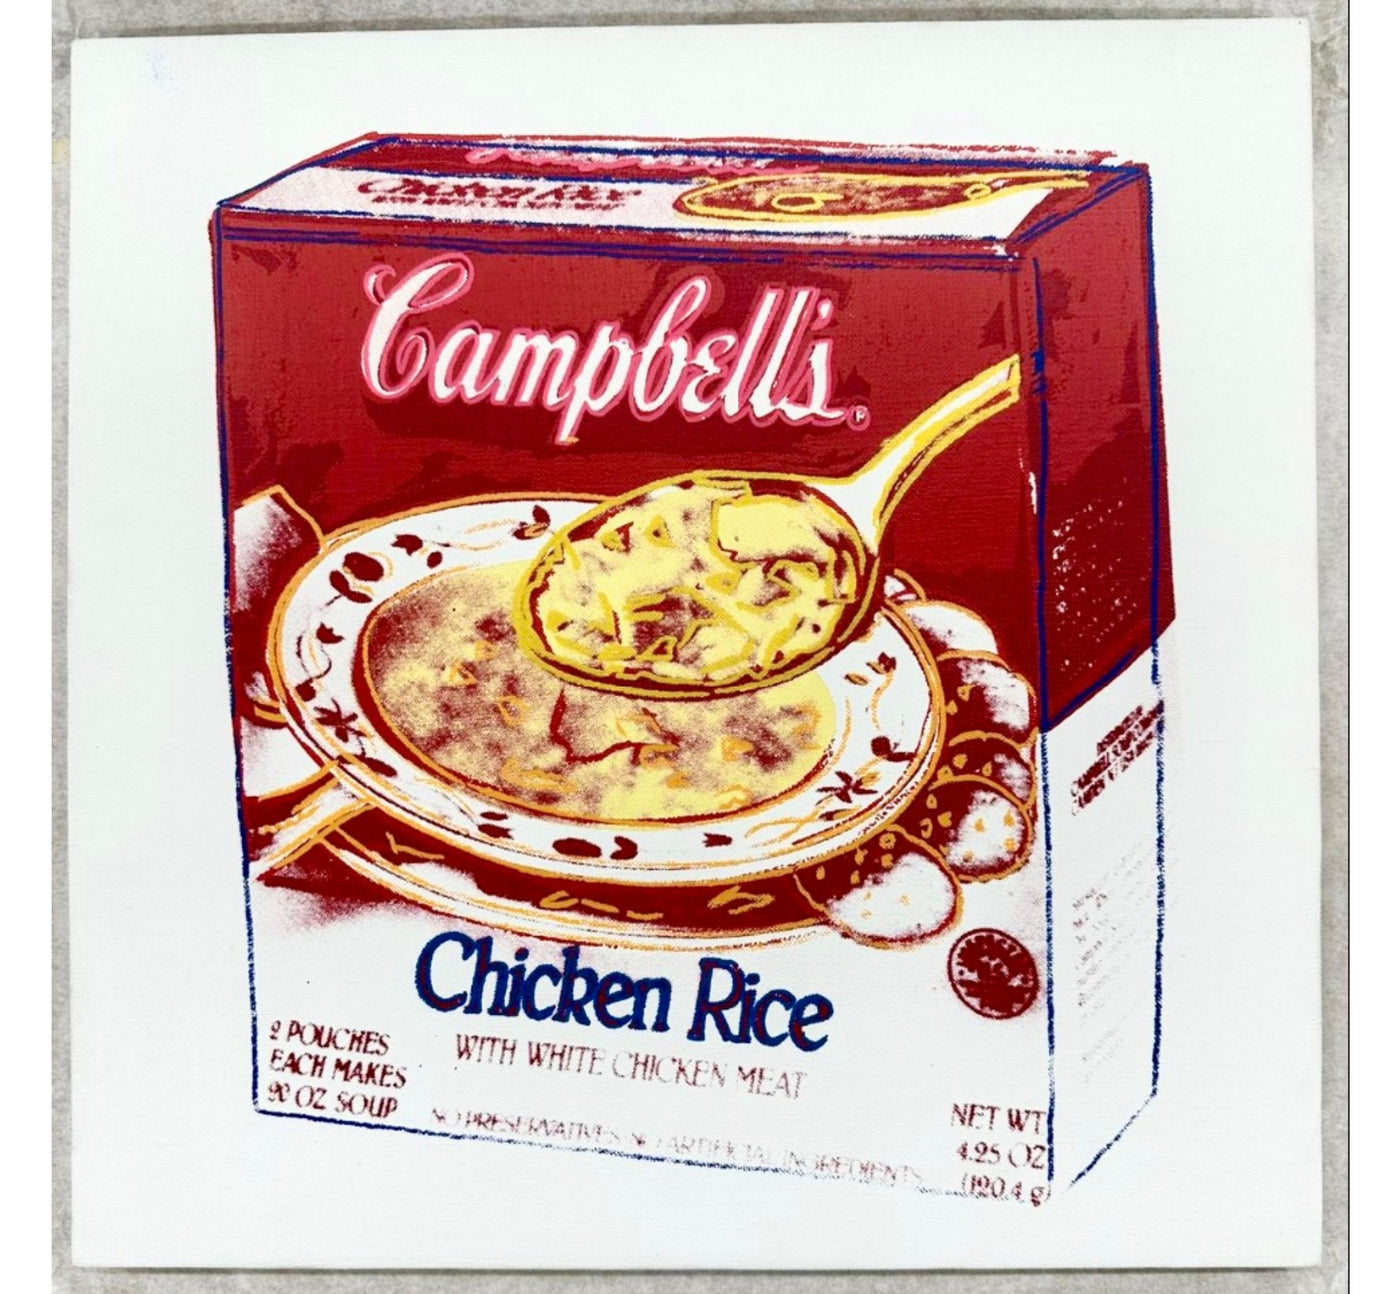 Andy Warhol Campbell's Soup Box (Chicken Rice) 1986